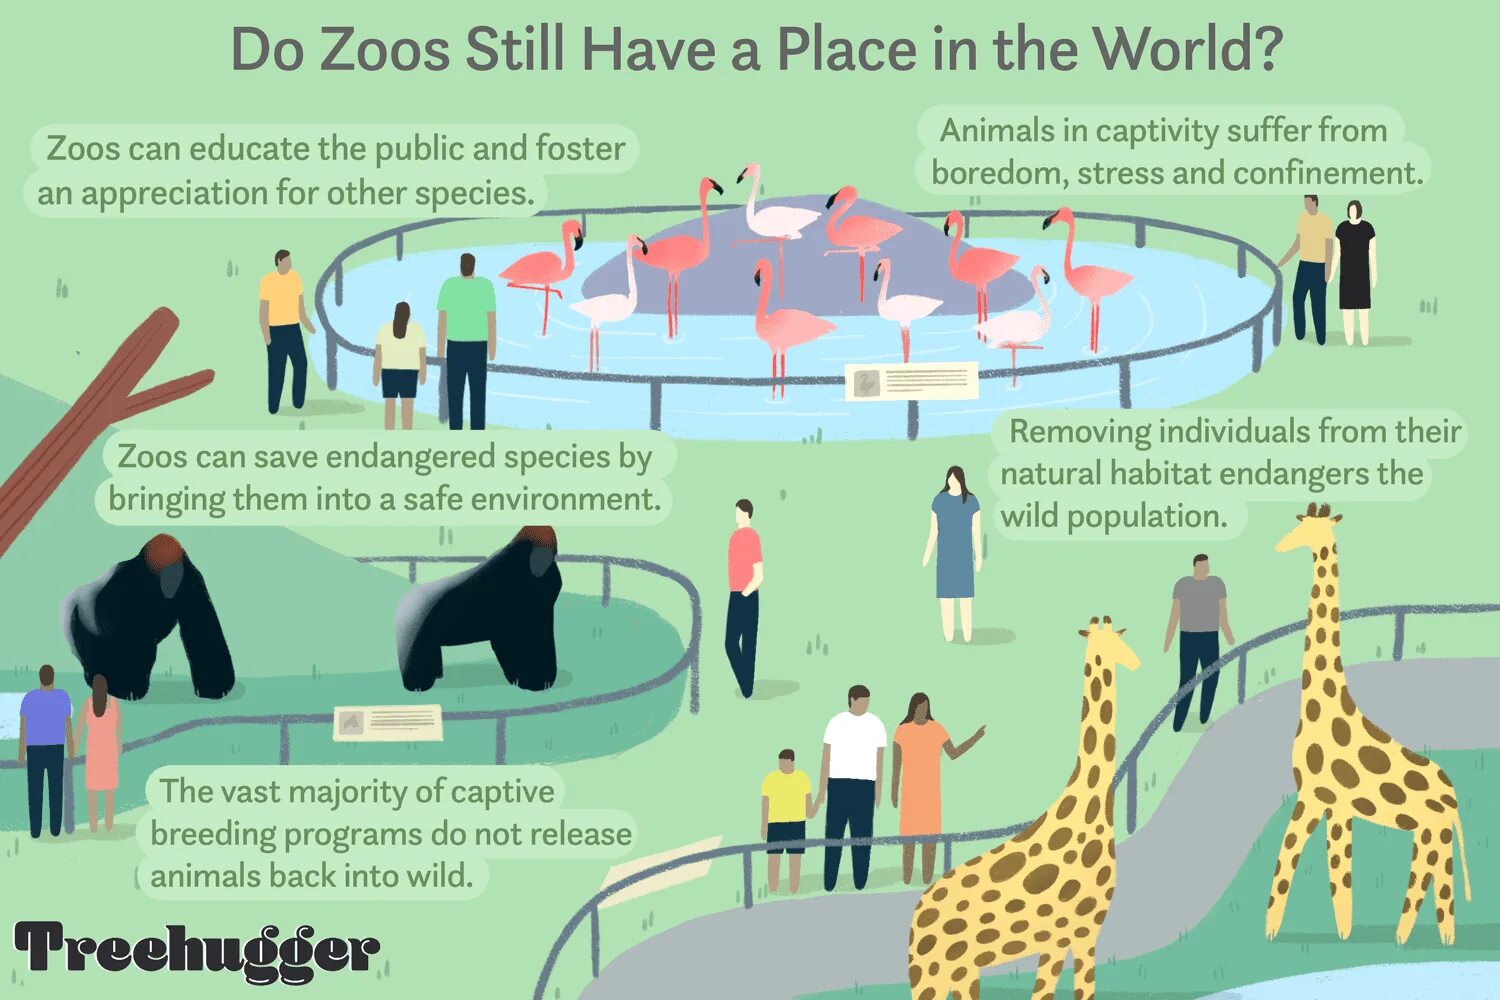 Zoos for and against. Аргументы за и против зоопарков. Аргументы в пользу зоопарка. Zoos Pros and cons.